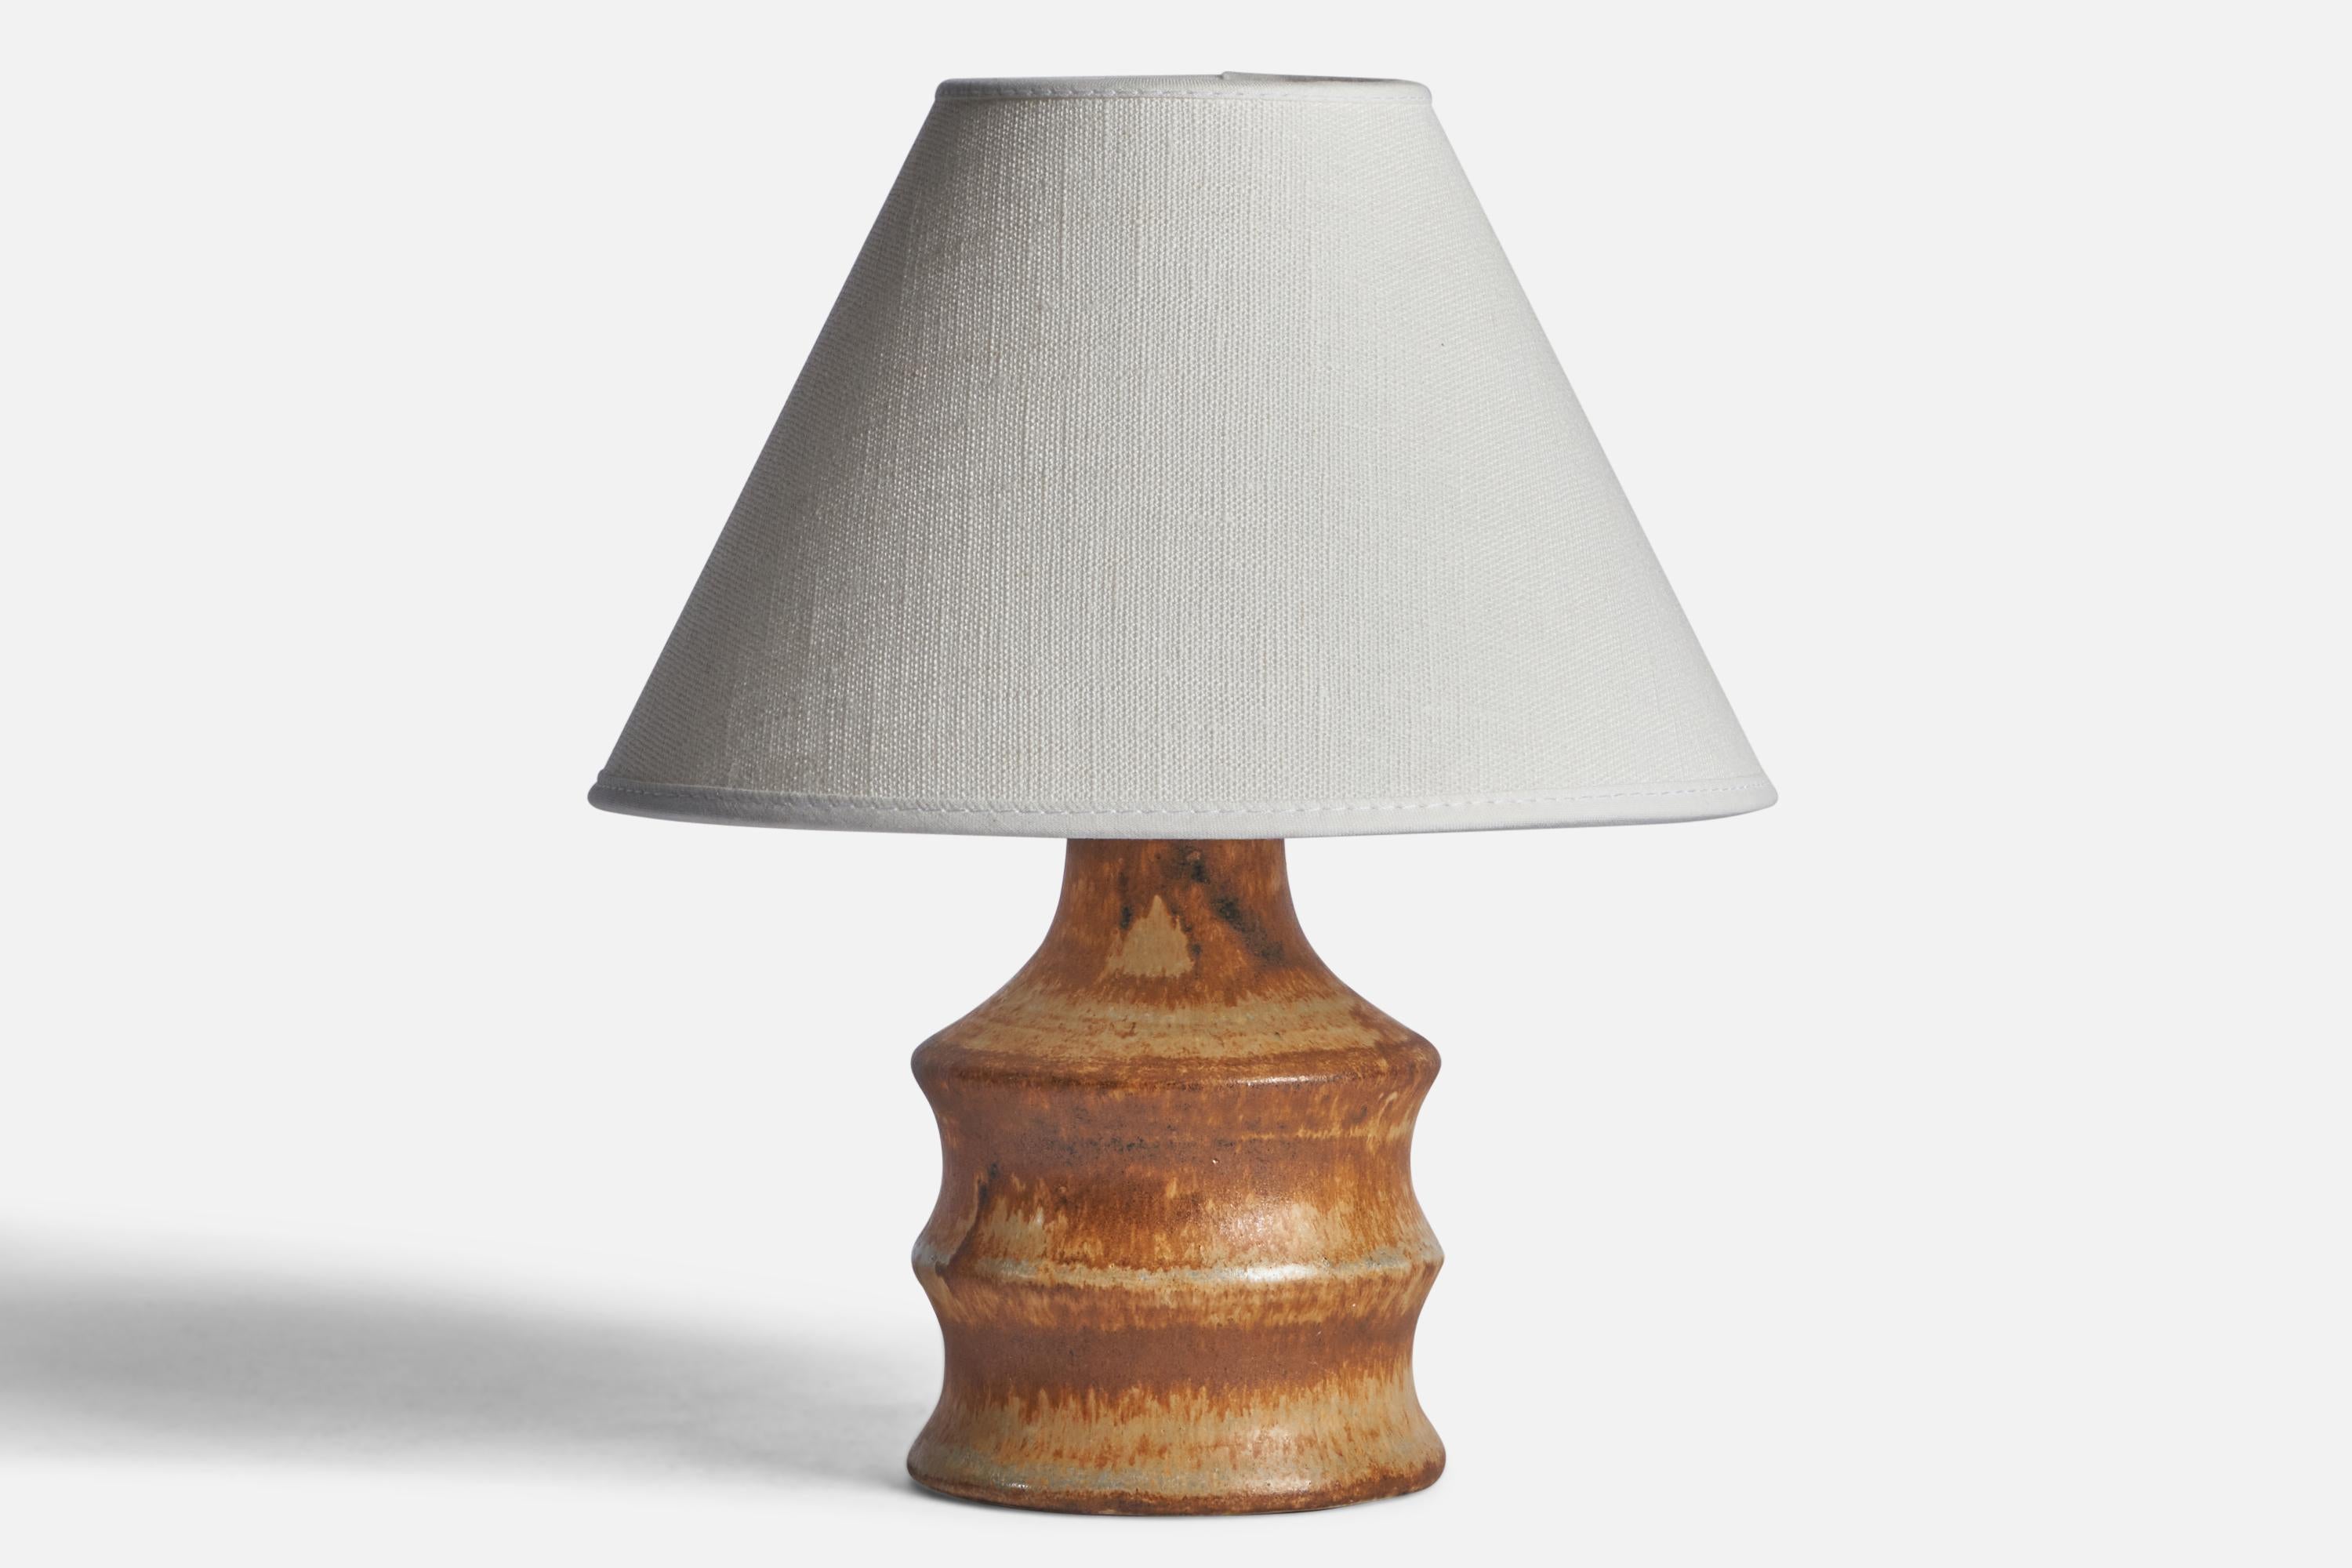 A brown-glazed stoneware table lamp designed by Bruno Karlsson and produced by Ego Stengods, Sweden, c. 1960s.

Dimensions of Lamp (inches): 6.9” H x 3.65” Diameter

Dimensions of Shade (inches): 3” Top Diameter x 8” Bottom Diameter x 5”